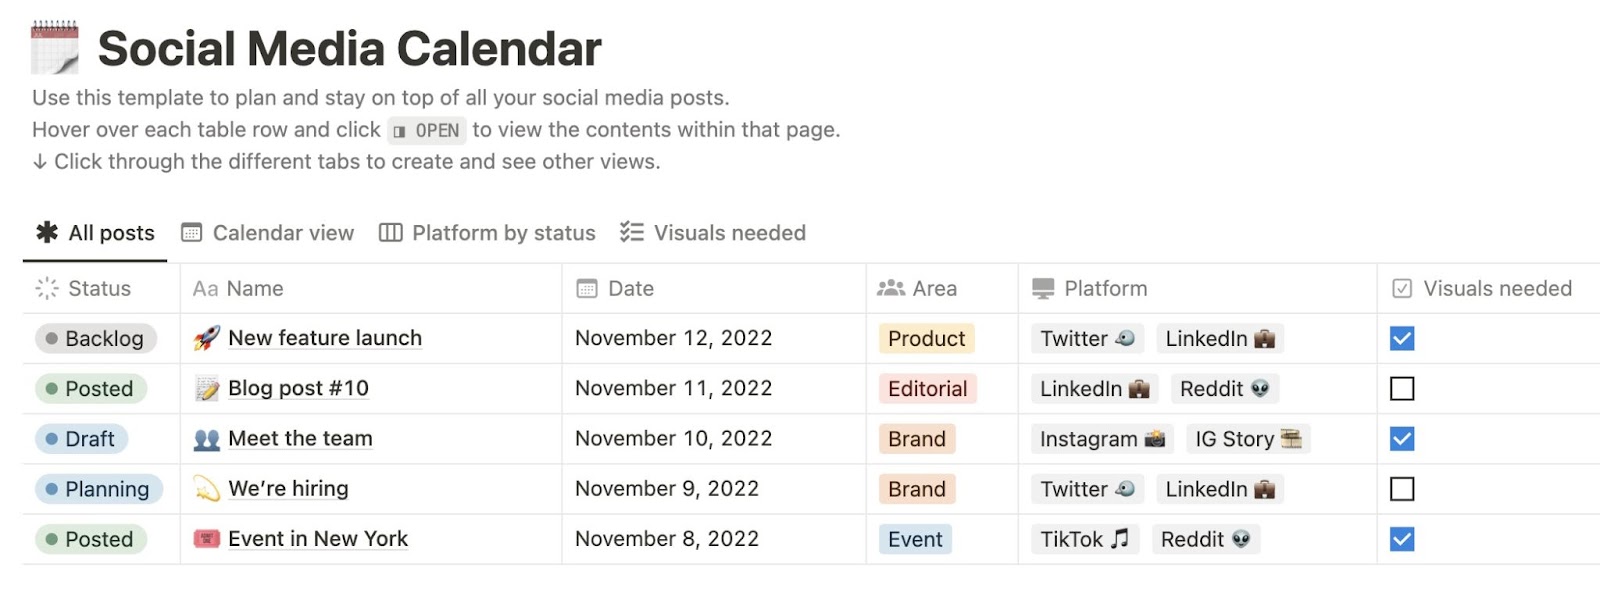 Social media calendar template on Notion with sections for post name, status, ****, and platforms to be posted on.